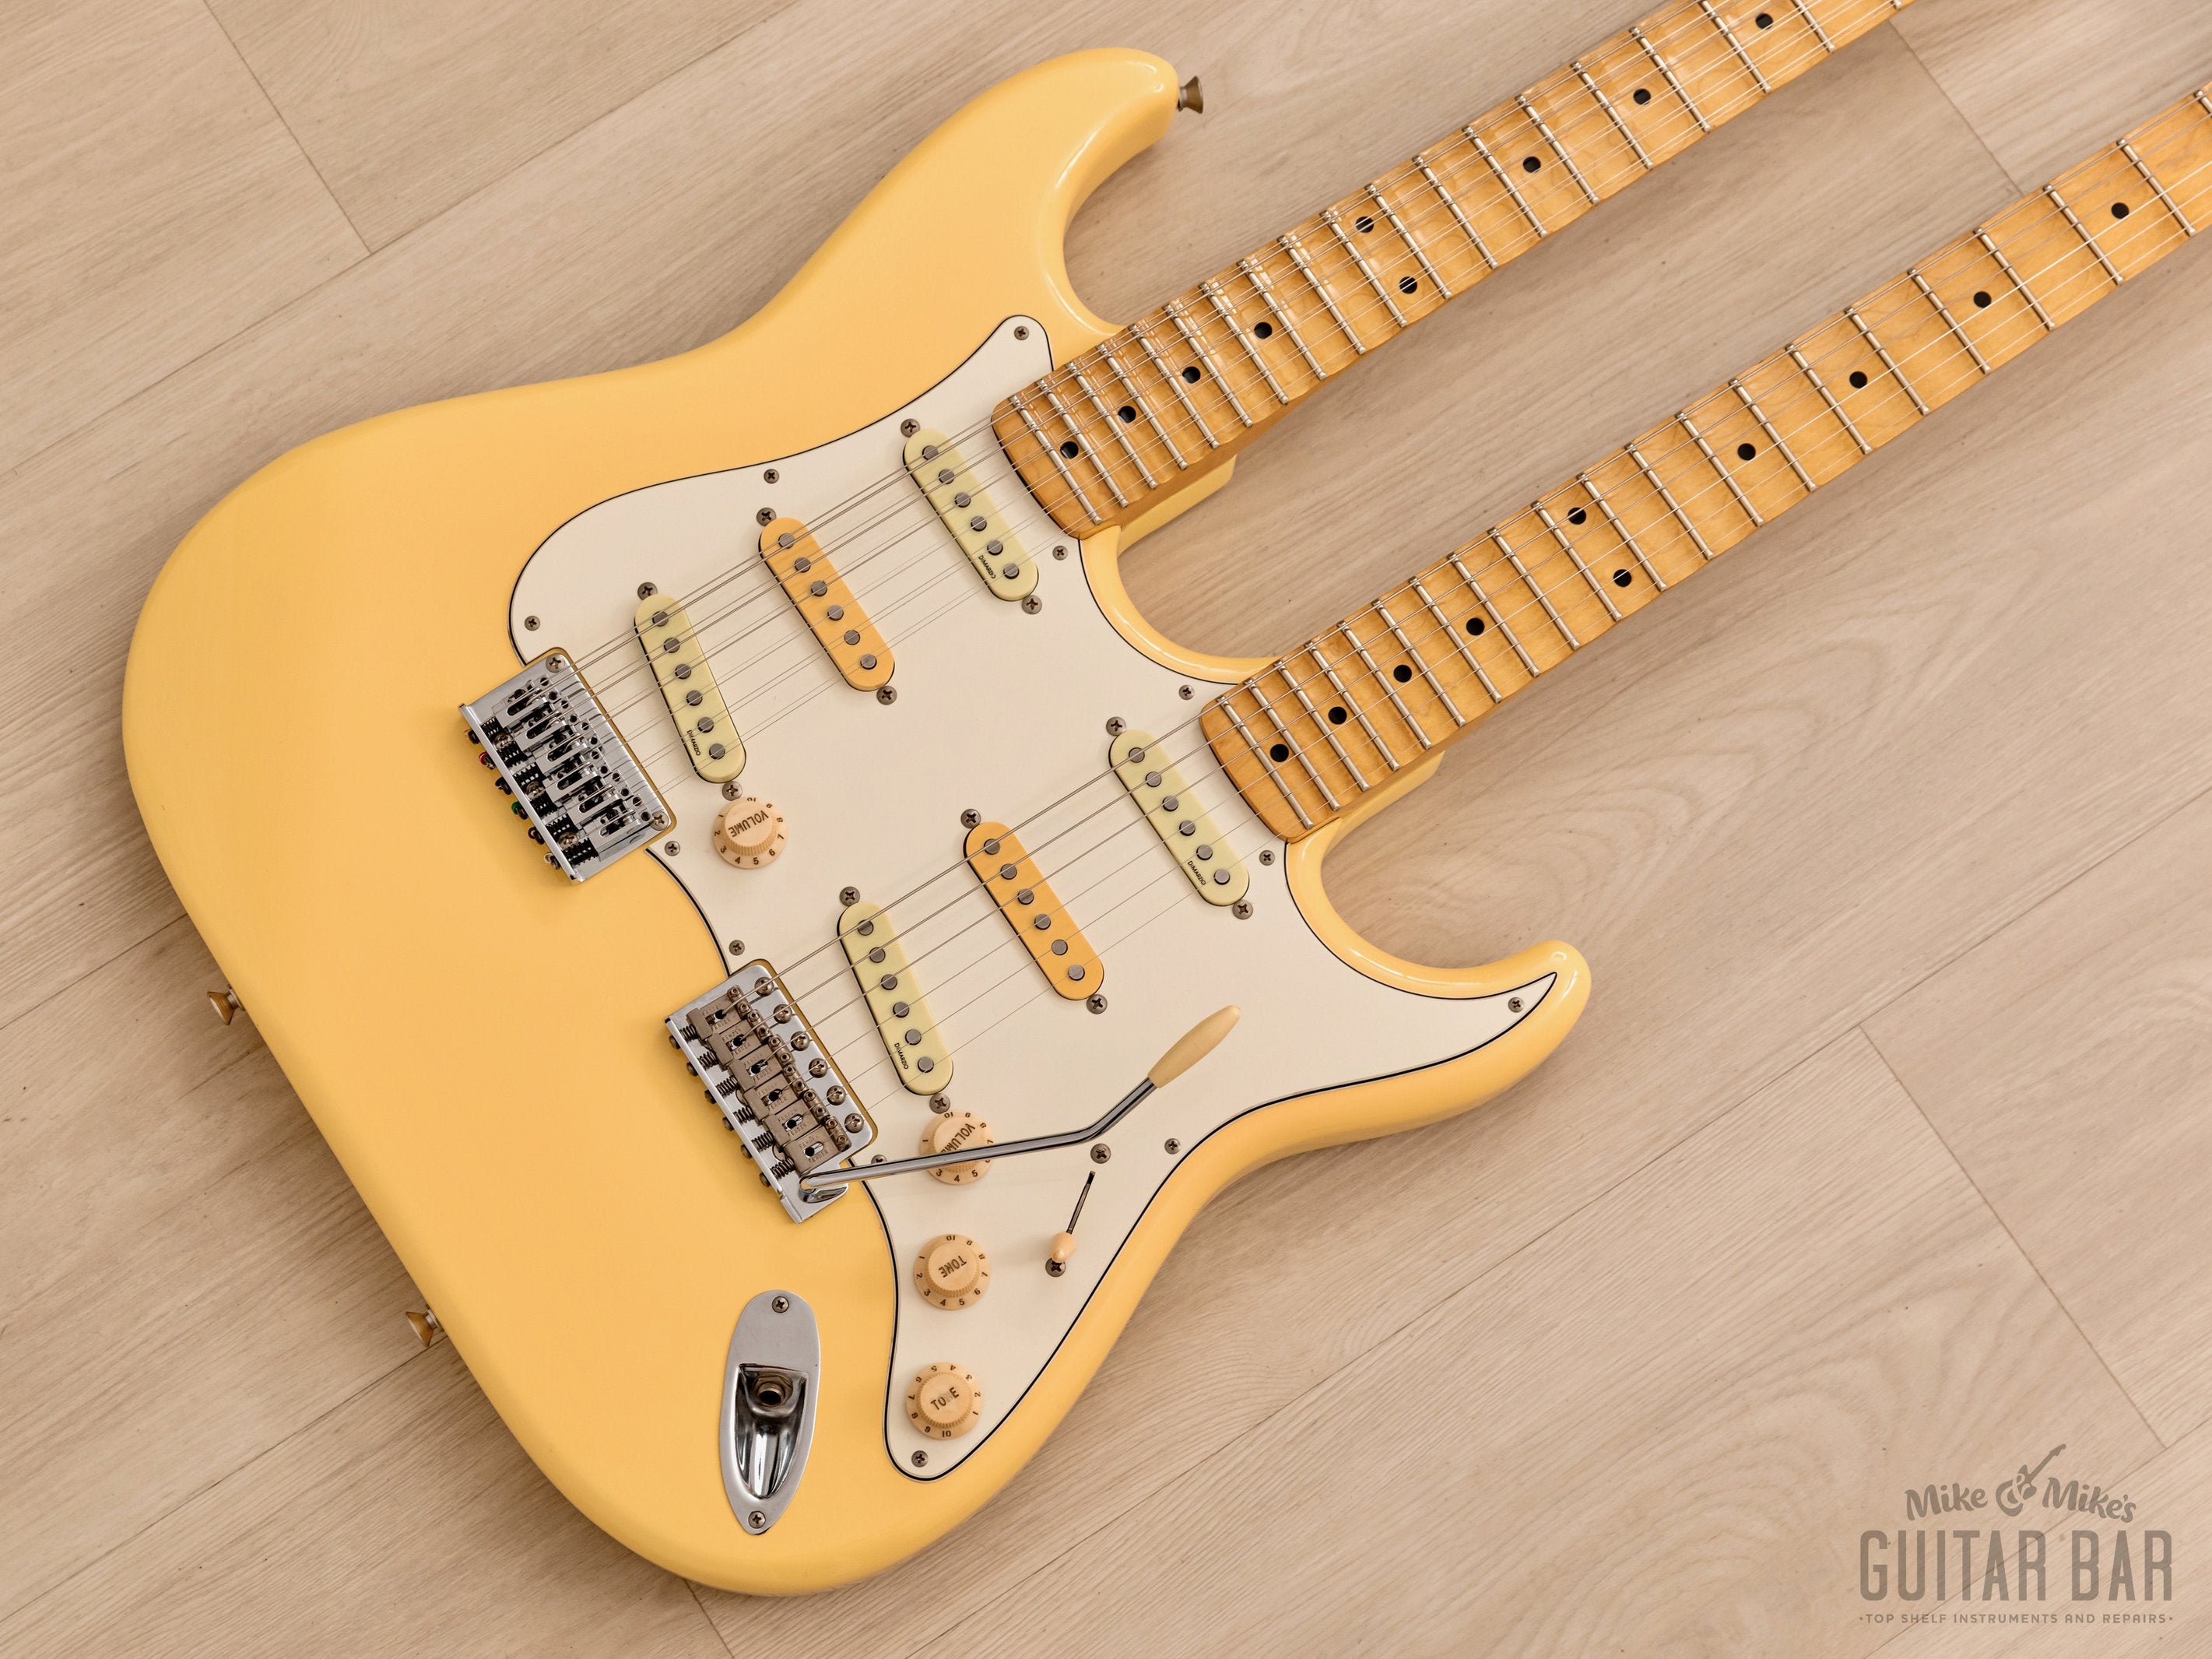 1995 Fender Yngwie Malmsteen Signature Stratocaster Double Neck STW-230YJM w/ Case & Tags, Japan MIJ